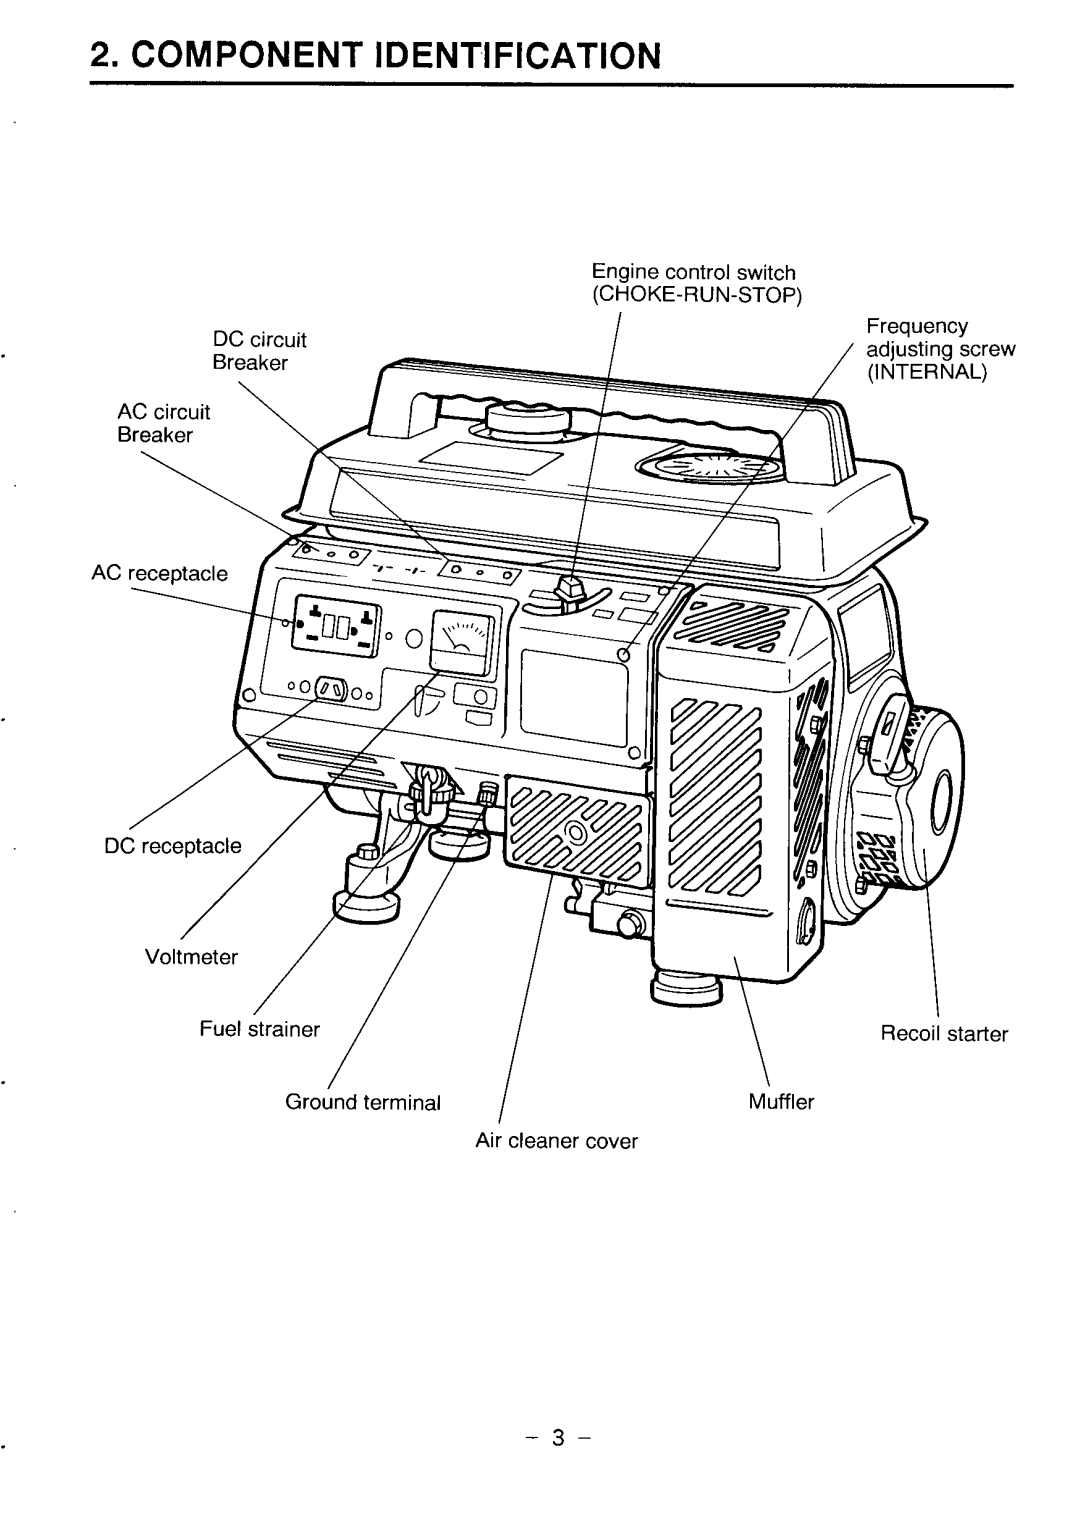 Makita G1200R instruction manual Component Identification, Engine control switch, Ground terminal, Air cleaner cover 